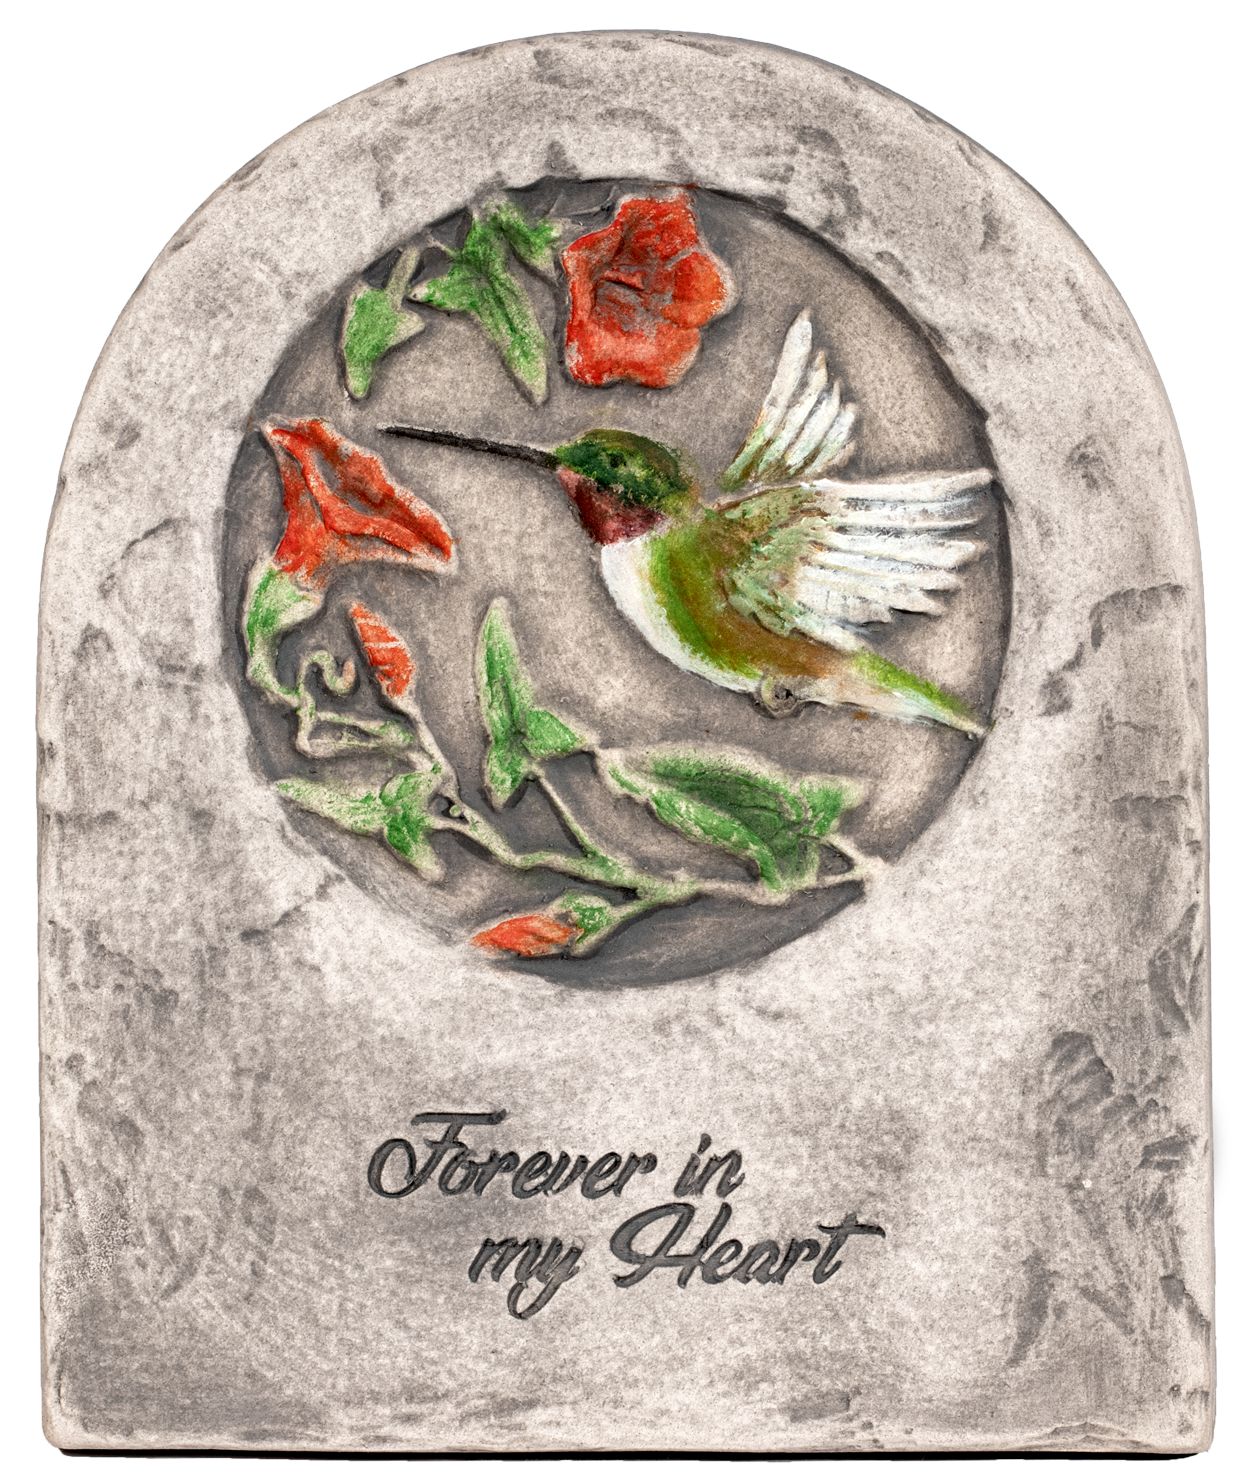 Ceramic hand painted plaque with hummingbird and flower design for memorial